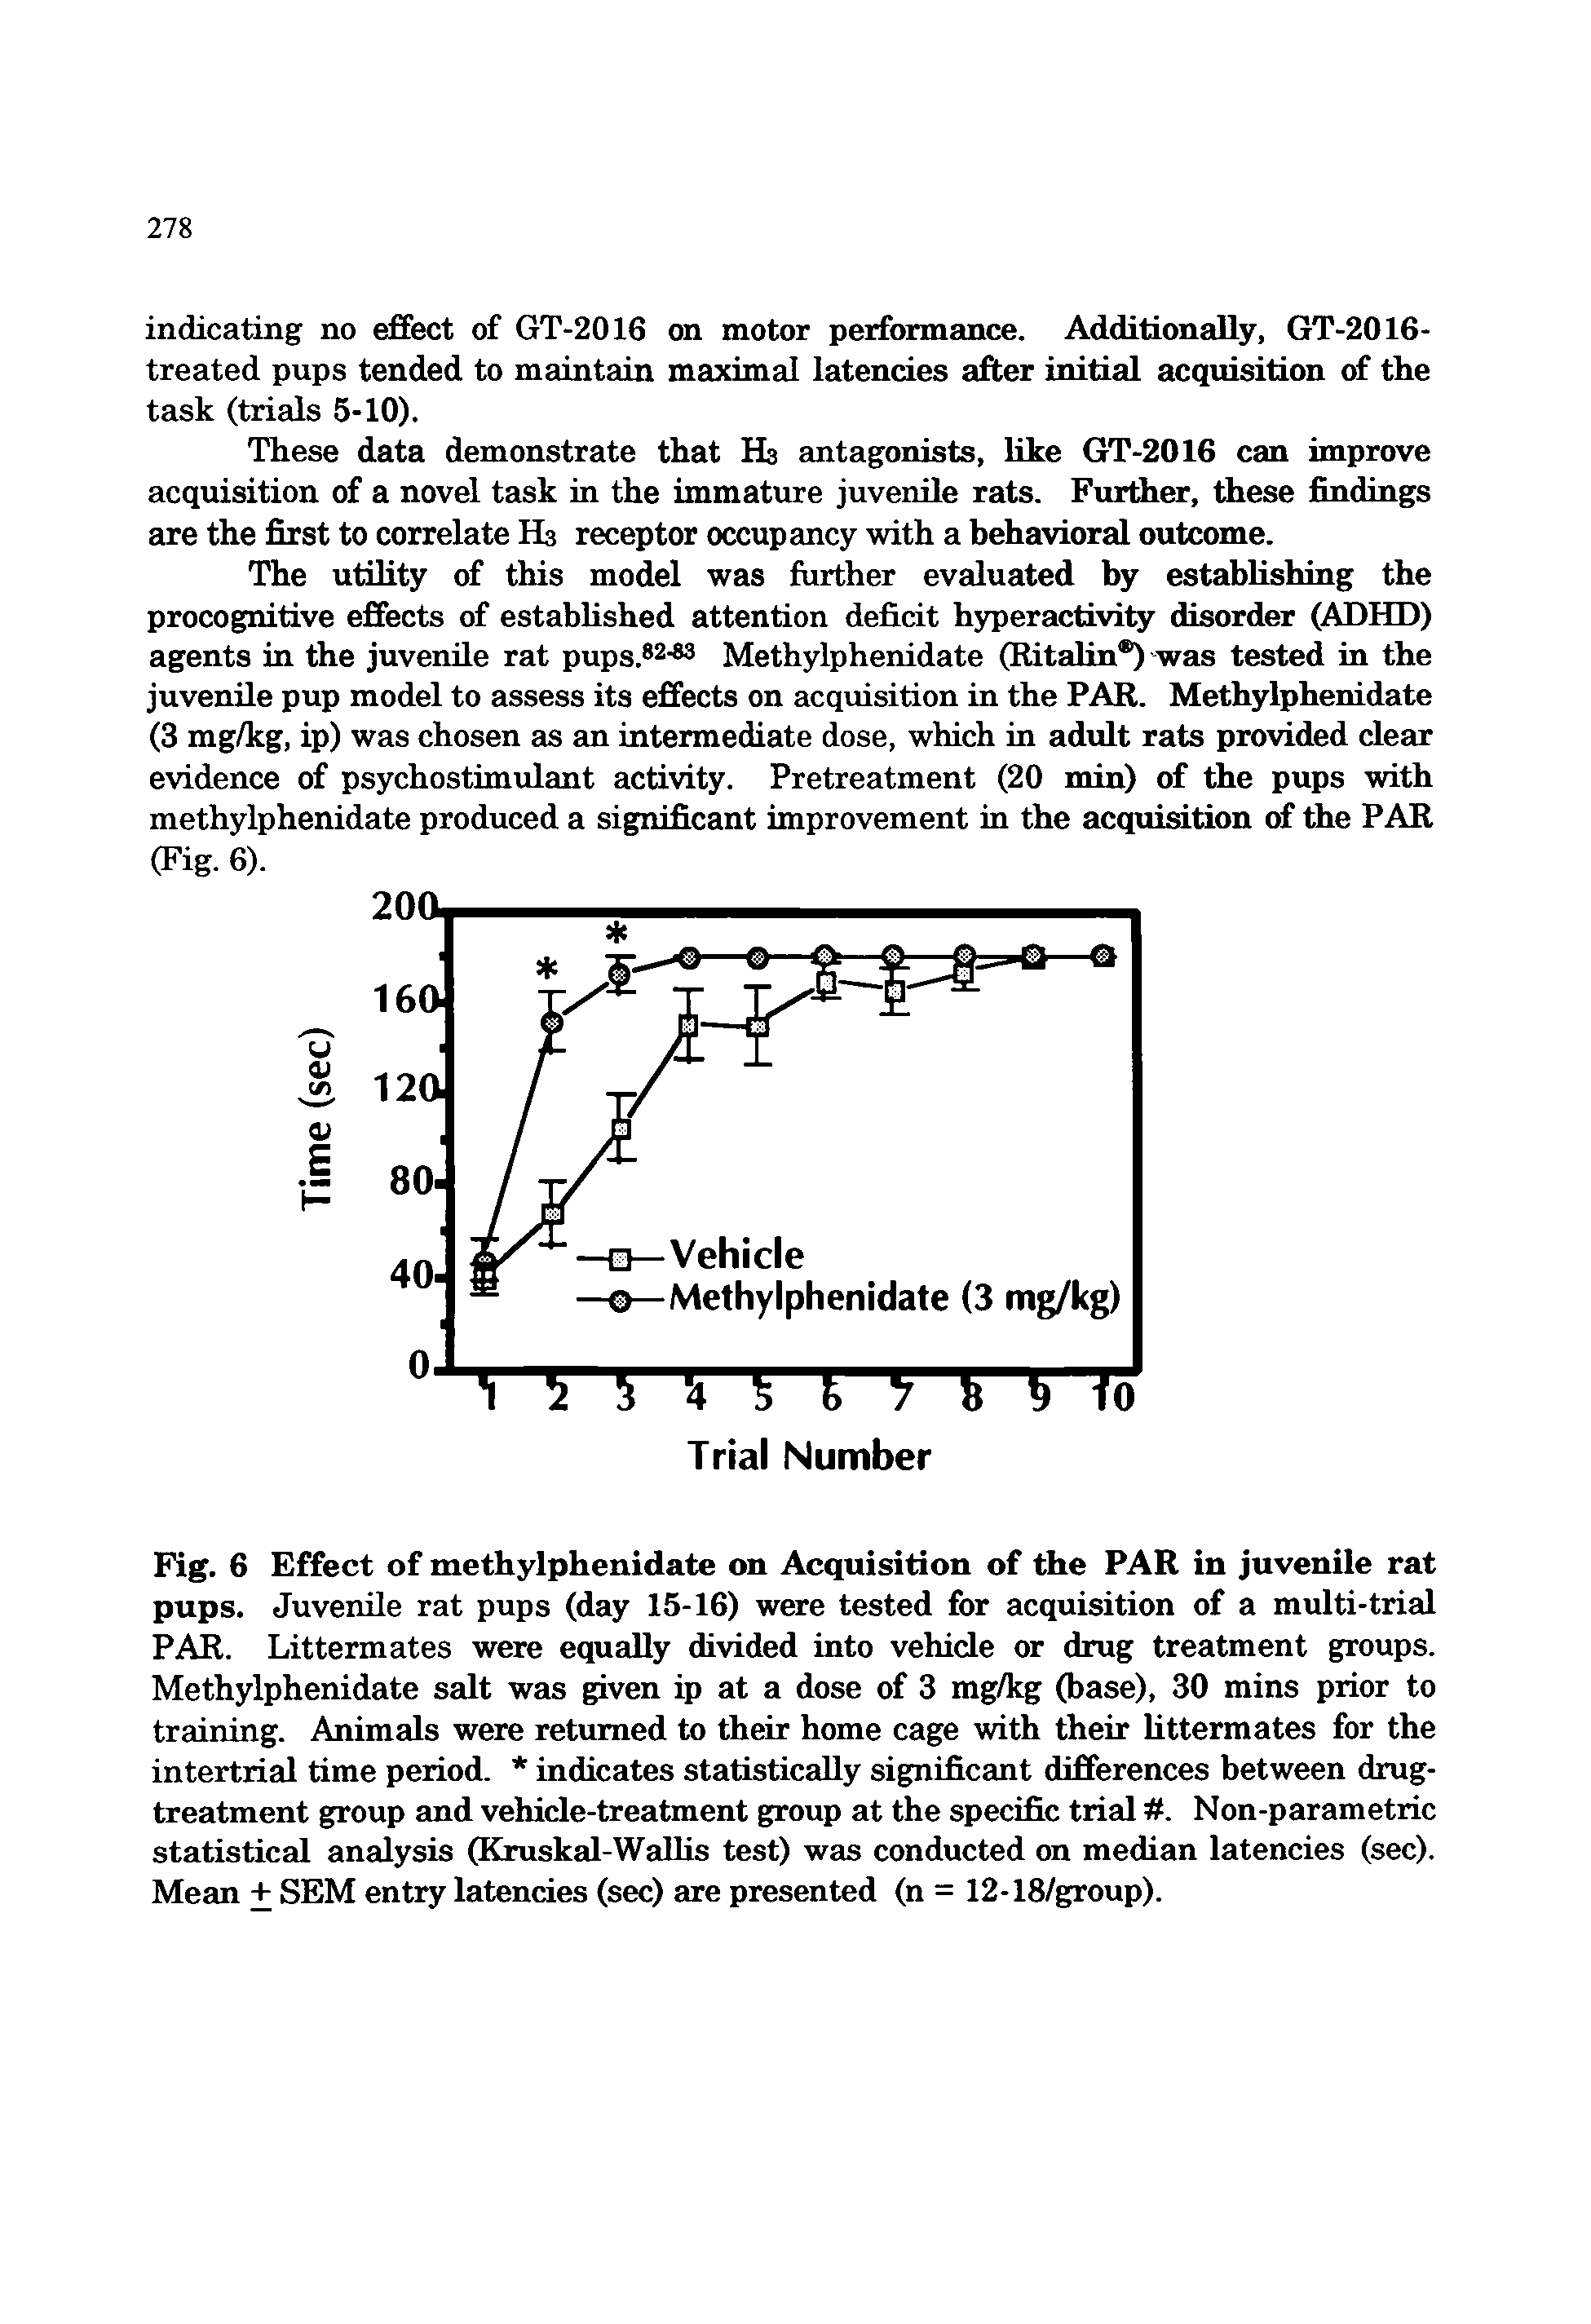 Fig. 6 Effect of methylphenidate on Acquisition of the PAR in juvenile rat pups. Juvenile rat pups (day 15-16) were tested for acquisition of a multi-trial PAR. Littermates were equally divided into vehide or drug treatment groups. Methylphenidate salt was given ip at a dose of 3 mg/kg (base), 30 mins prior to training. Animals were returned to their home cage with their littermates for the intertrial time period. indicates statistically significant differences between drug-treatment group and vehide-treatment group at the specific trial. Non-parametric statistical analysis (Kruskal-Wallis test) was conducted on median latencies (sec). Mean + SEM entry latendes (sec) are presented (n = 12-18/group).